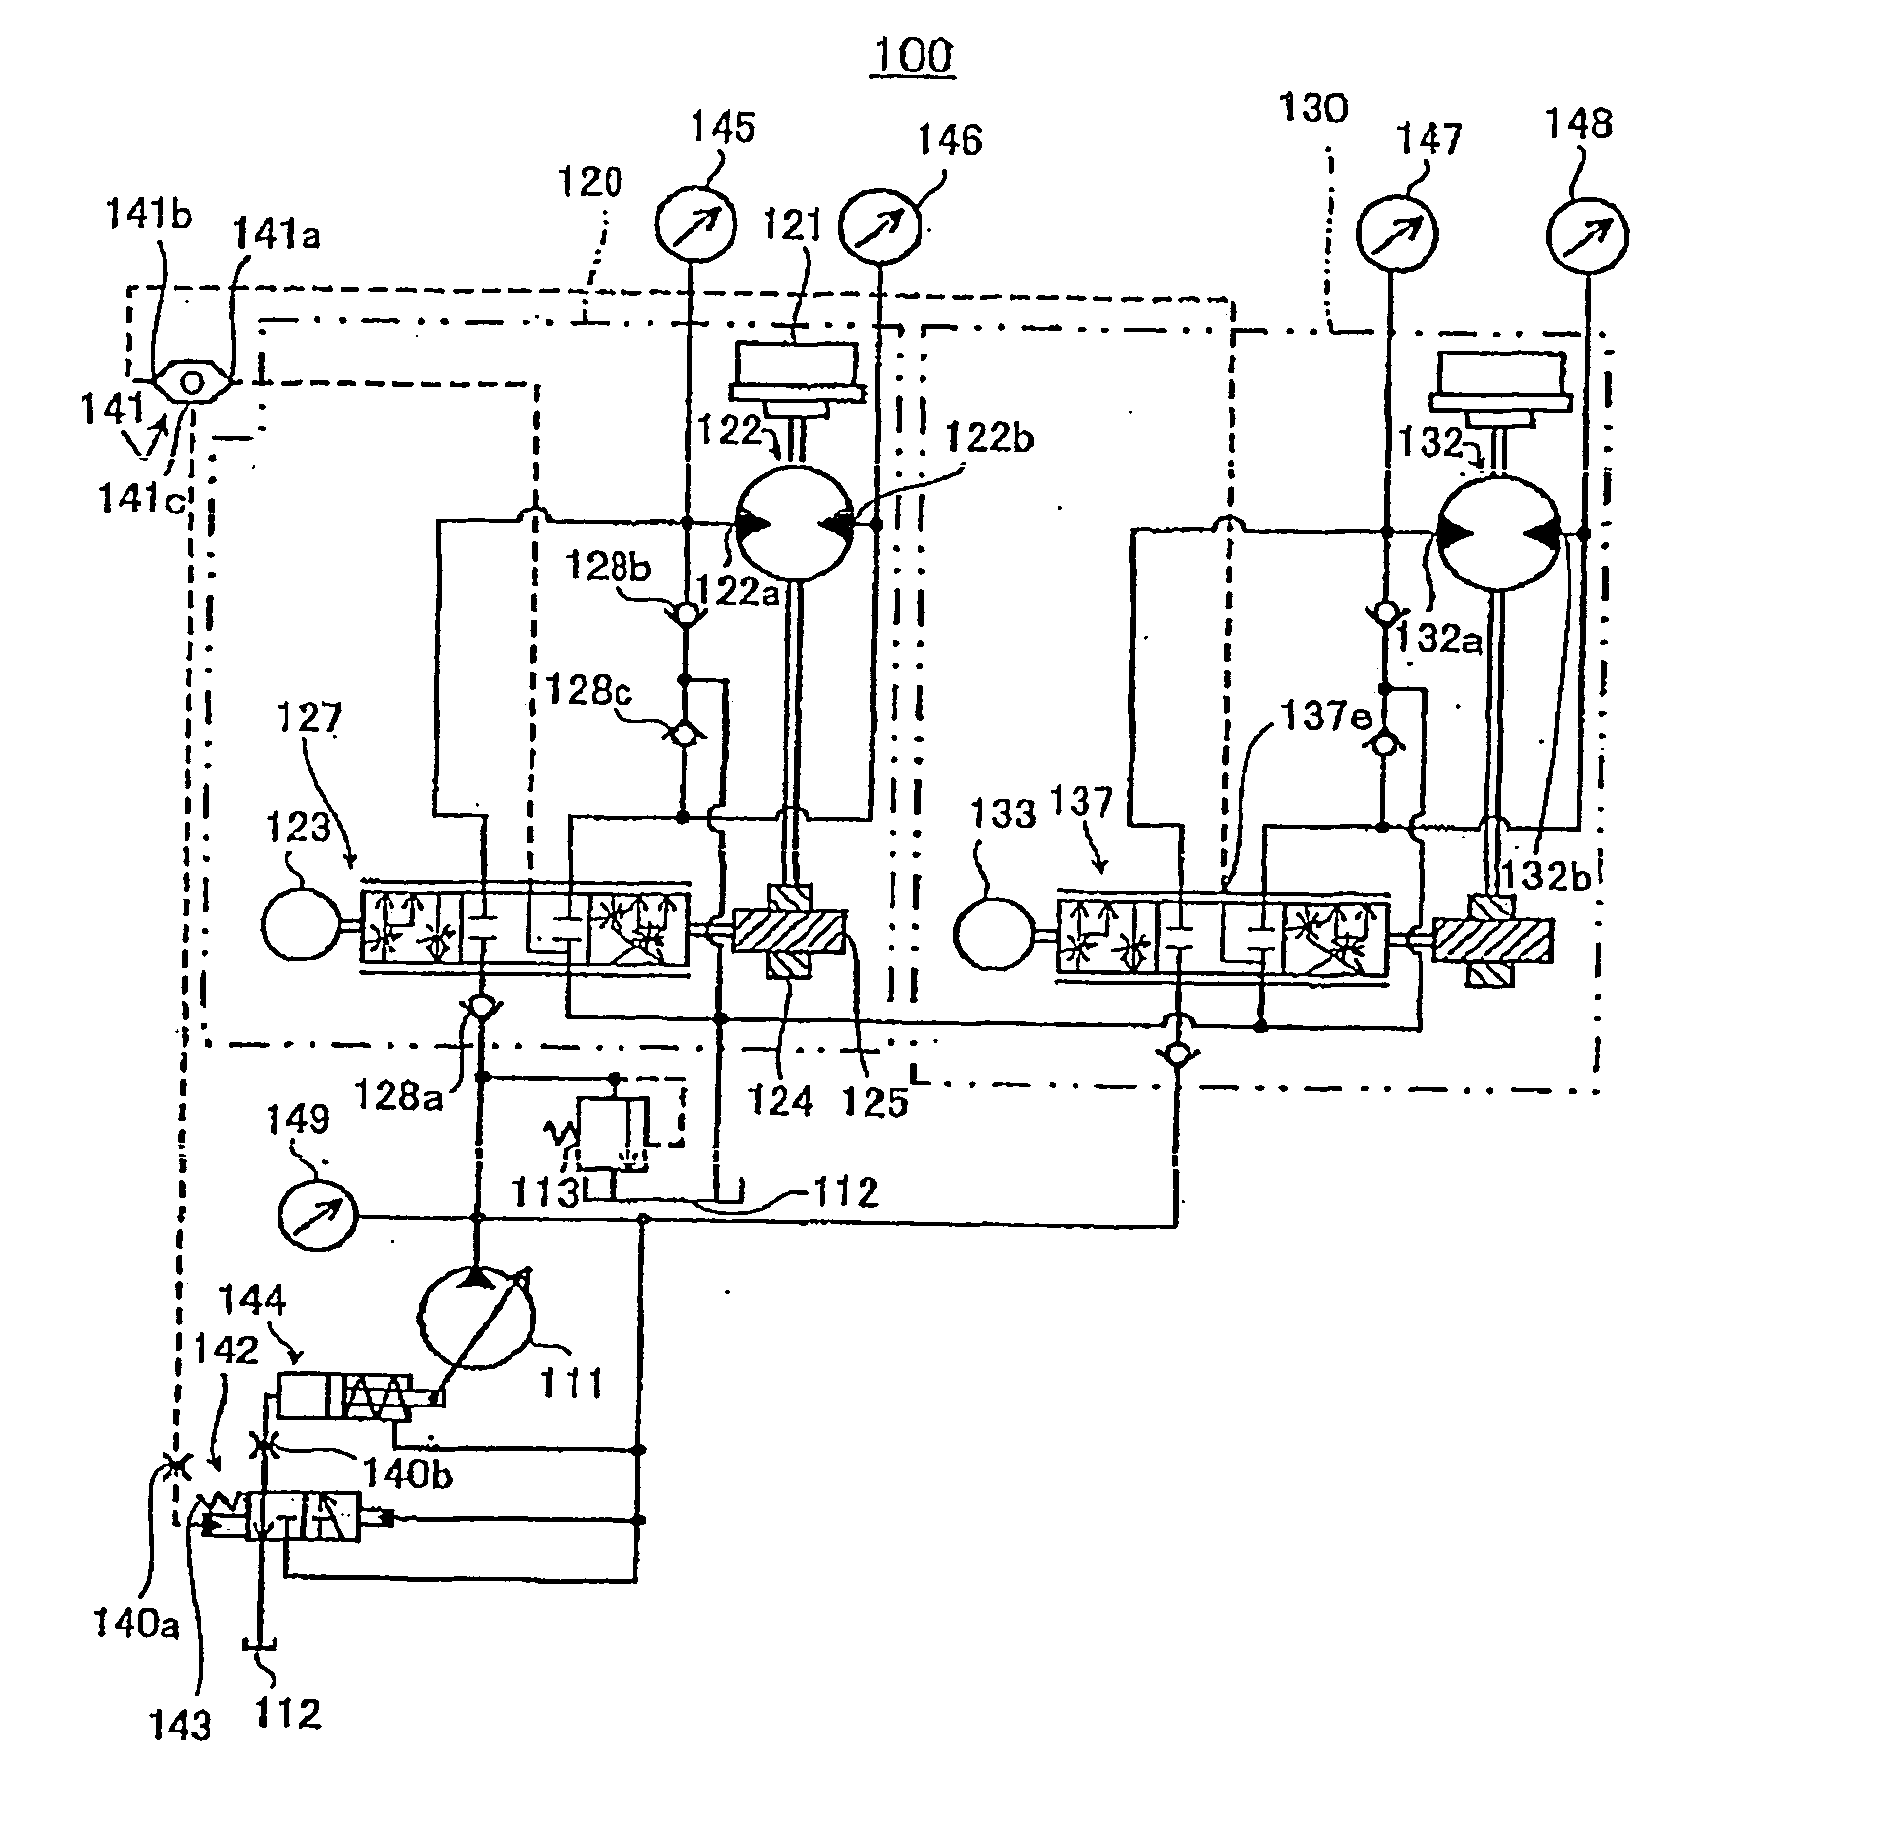 Electro-hydraulic actuation system